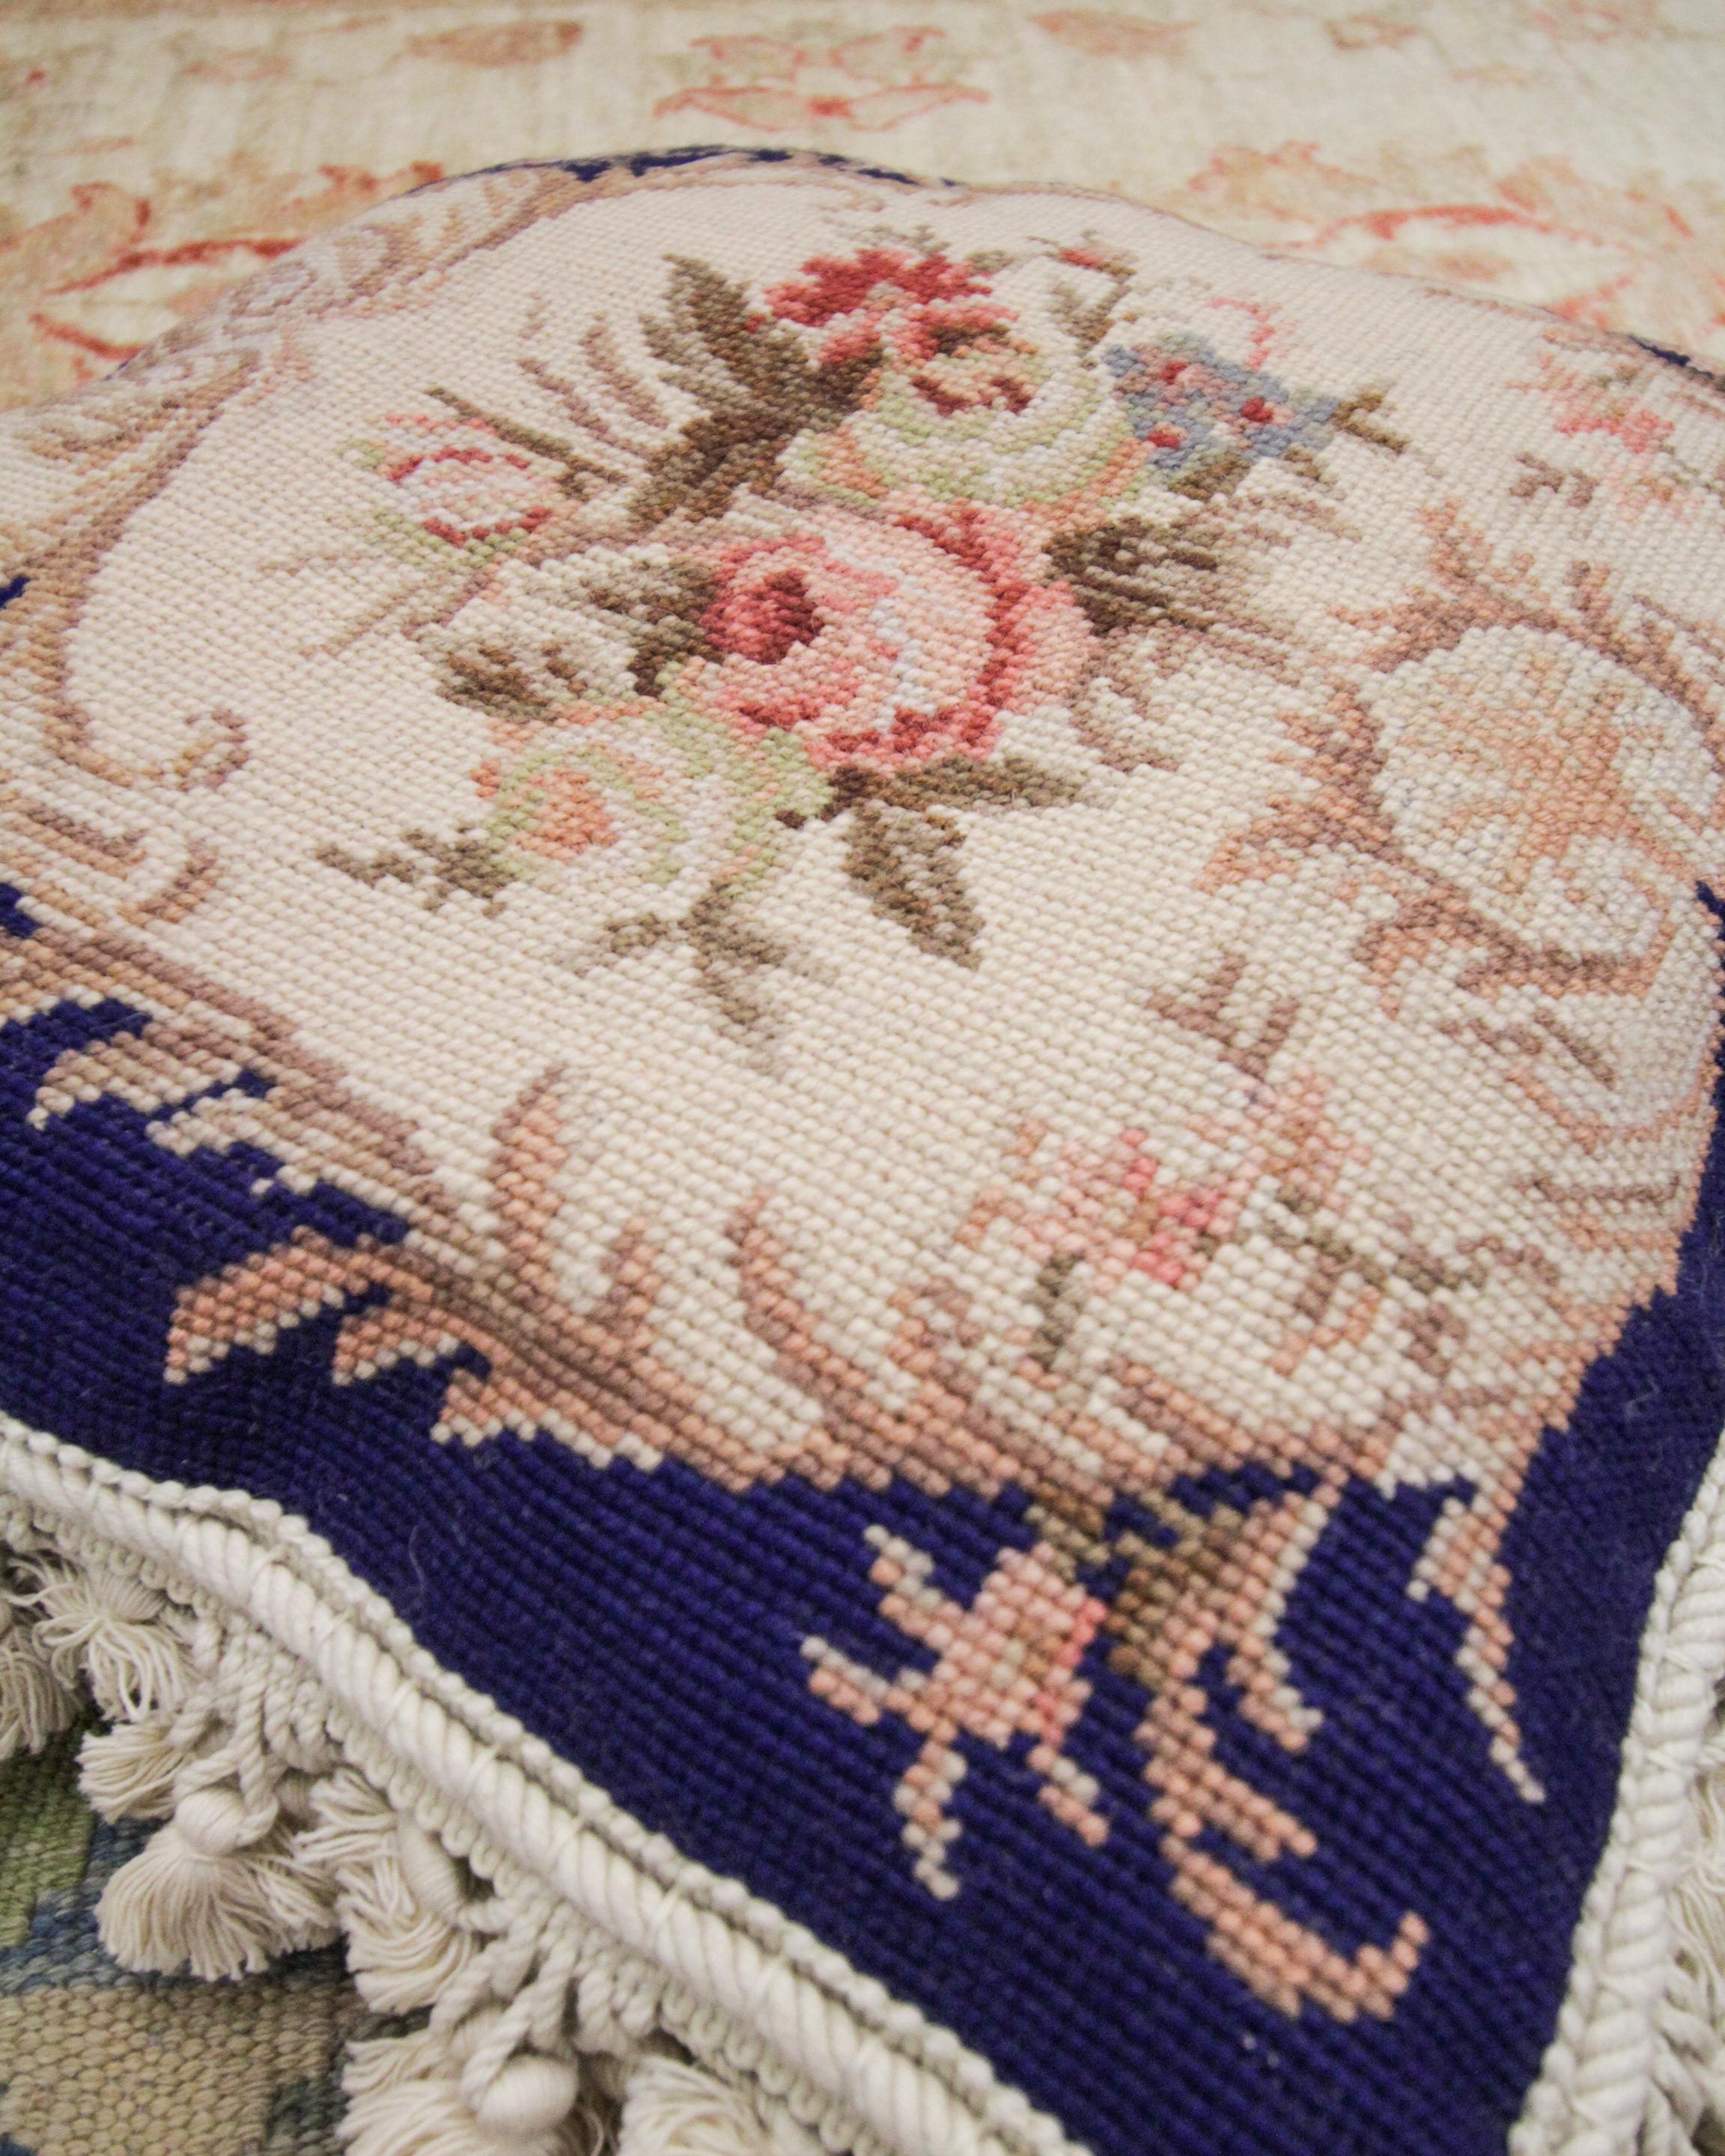 Woven by hand with a classic royal colour palette this cushion is an excellent example of needlepoint cushions from the 1990s. The central design features a cream background woven with an intricate floral design in accents of green, brown and pink.